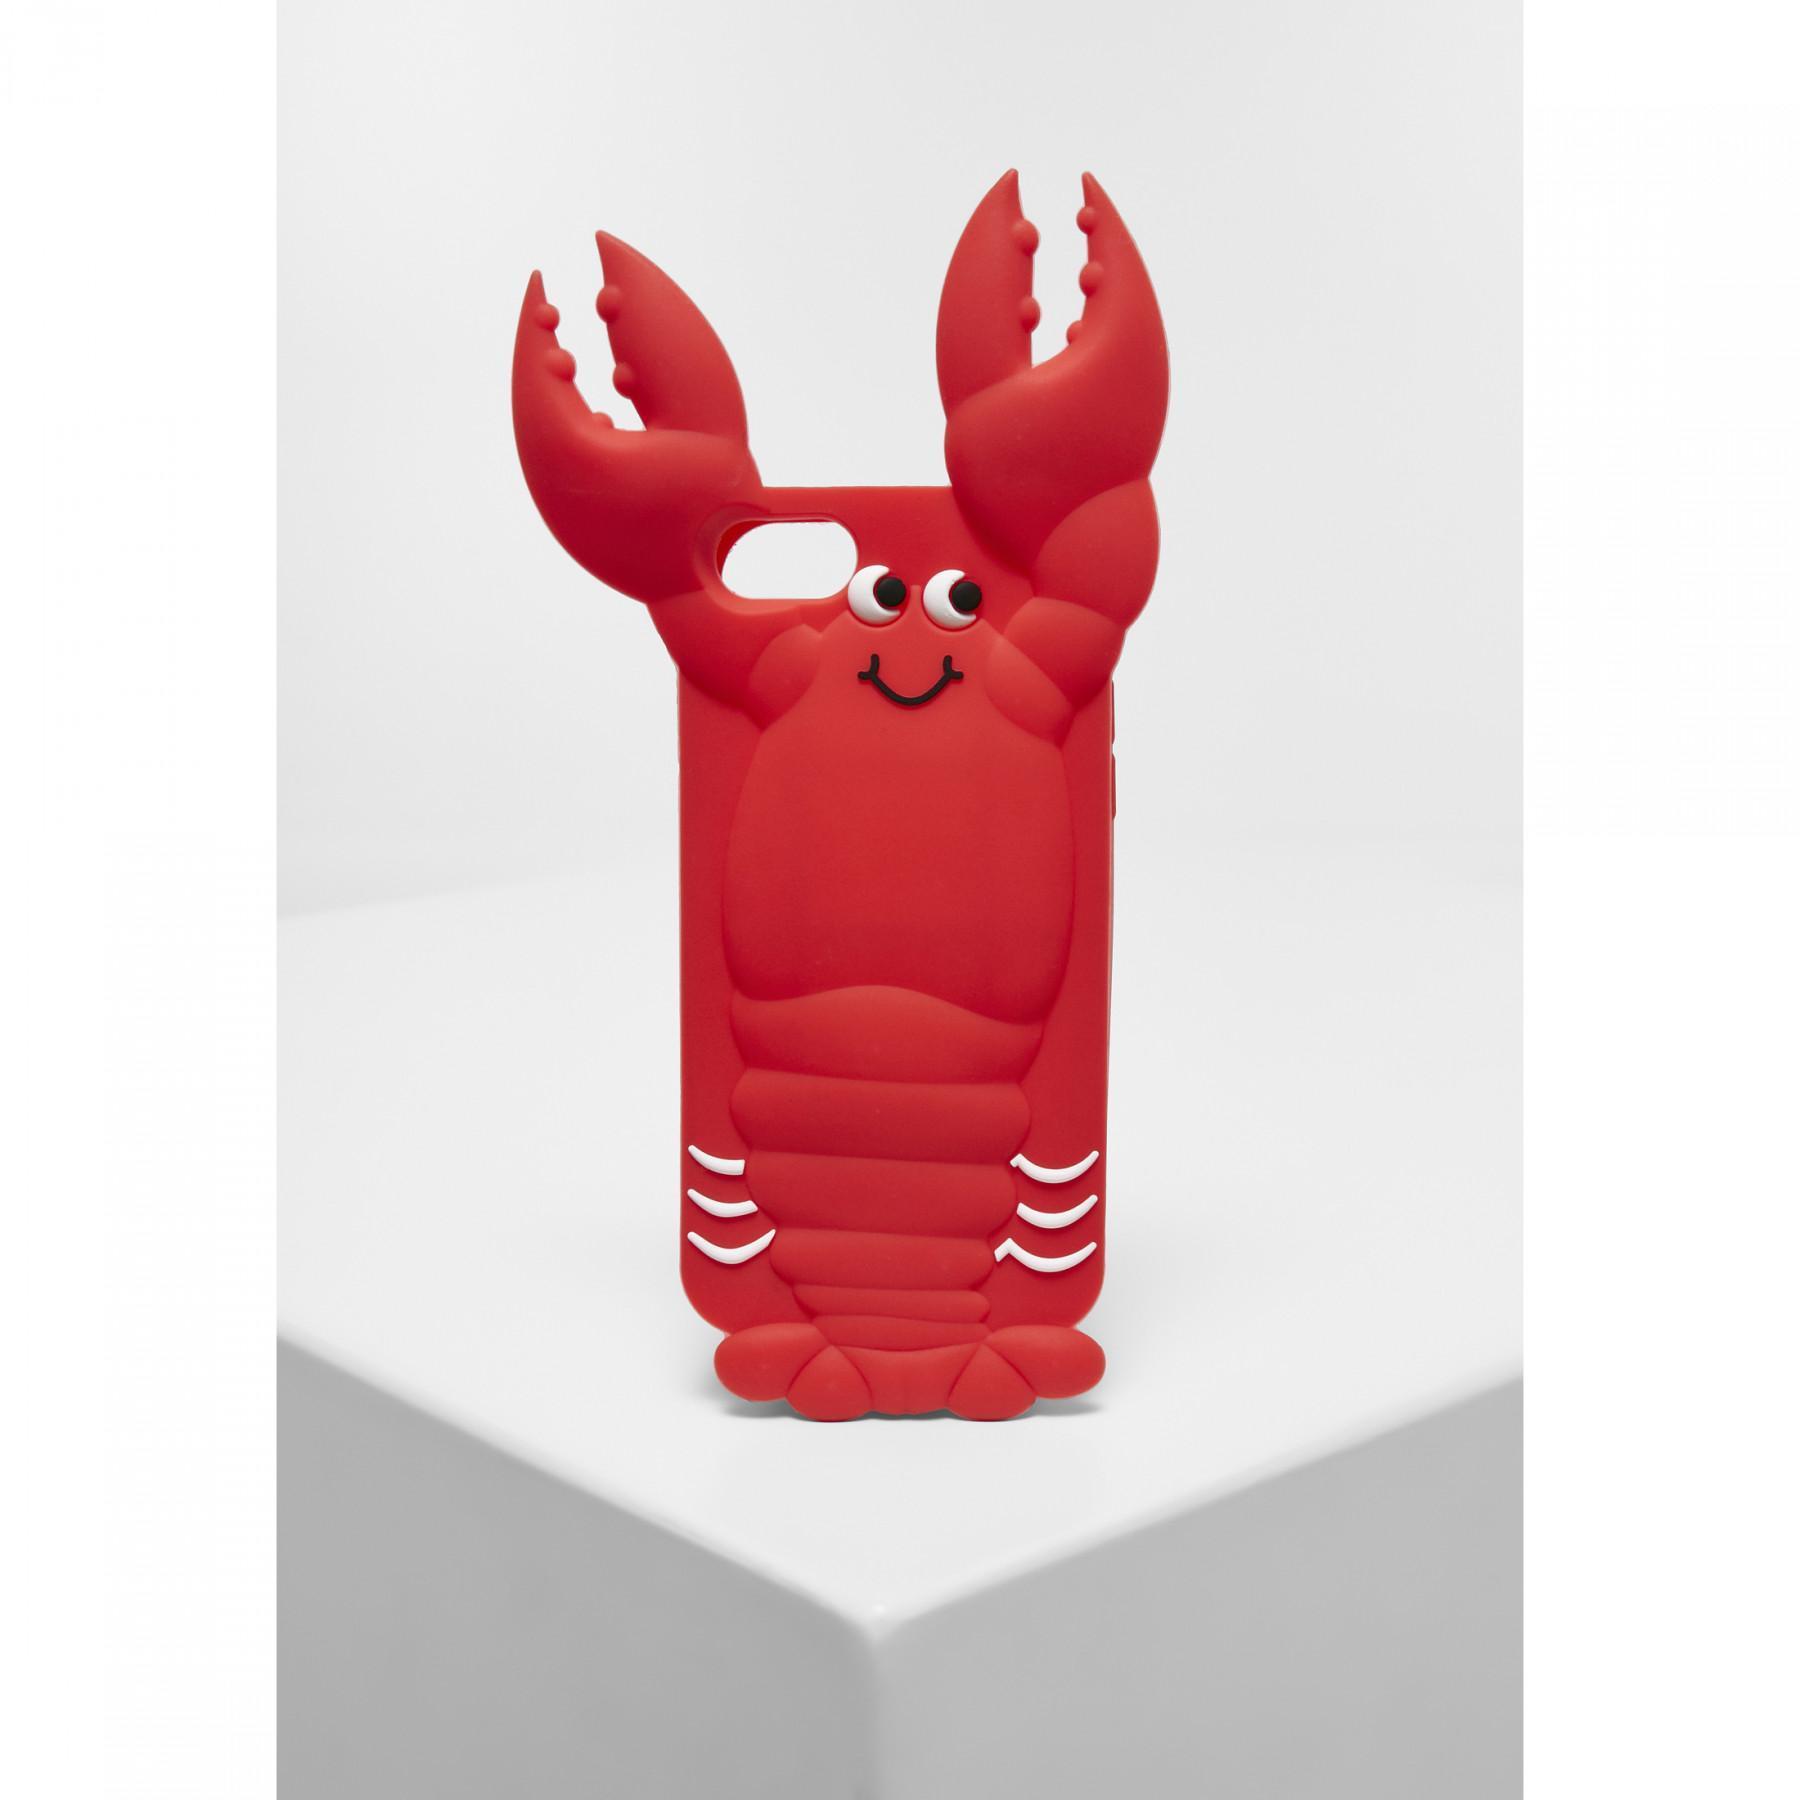 Case for iphone 7/8 Urban Classics lobster